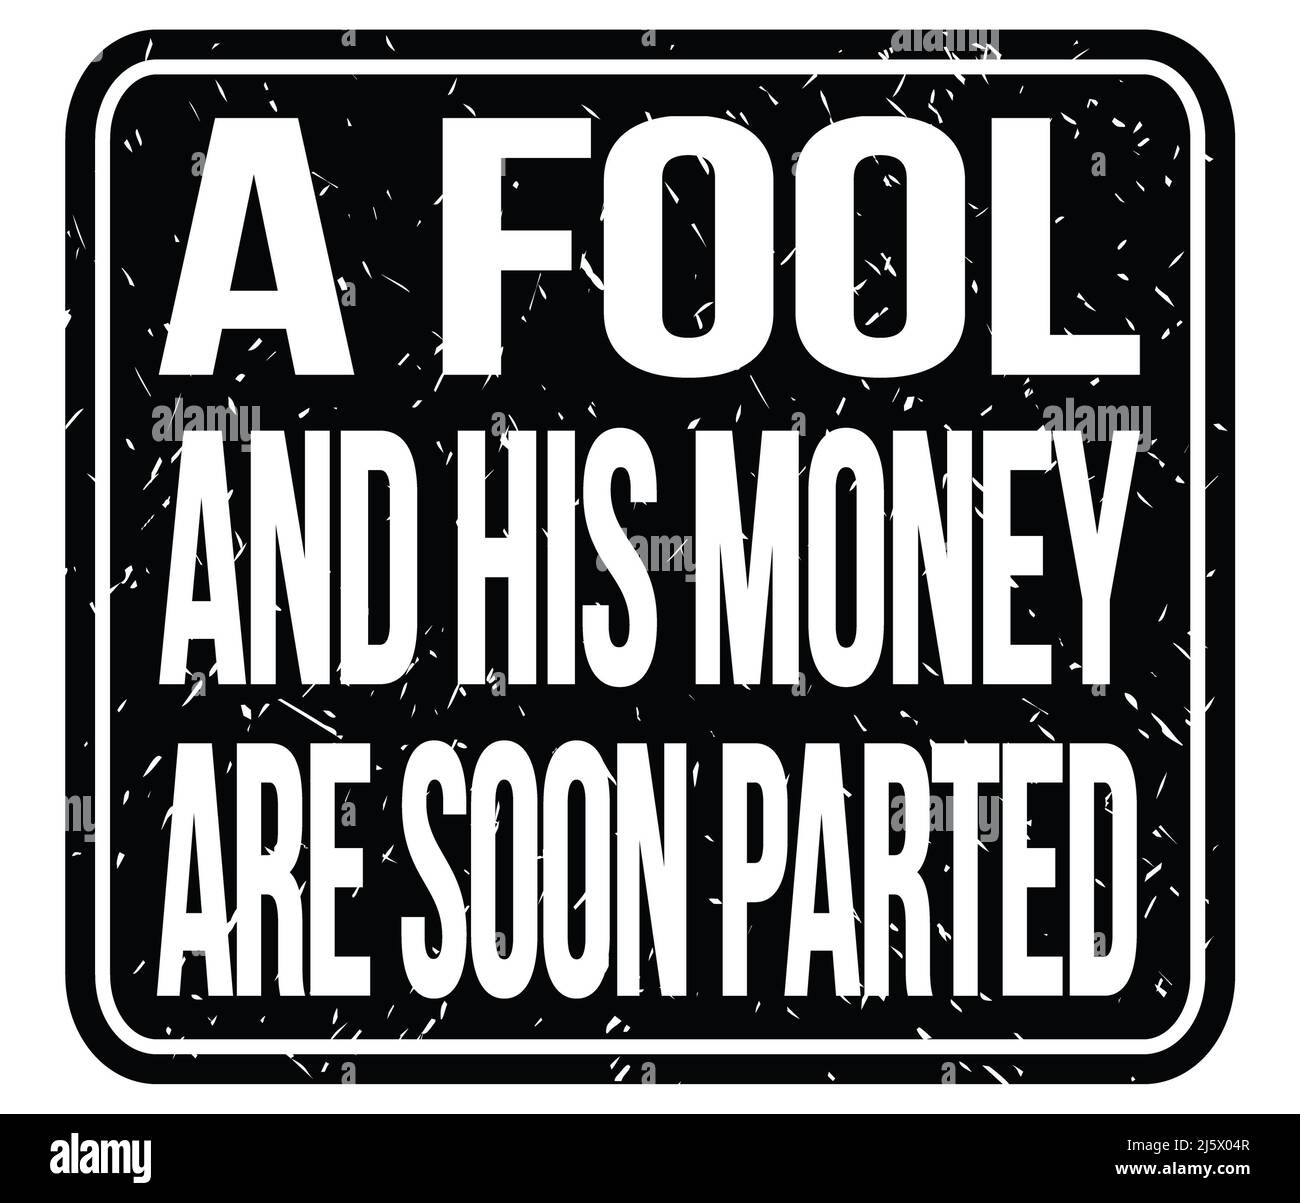 a-fool-and-his-money-are-soon-parted-text-written-on-black-stamp-sign-2J5X04R.jpg